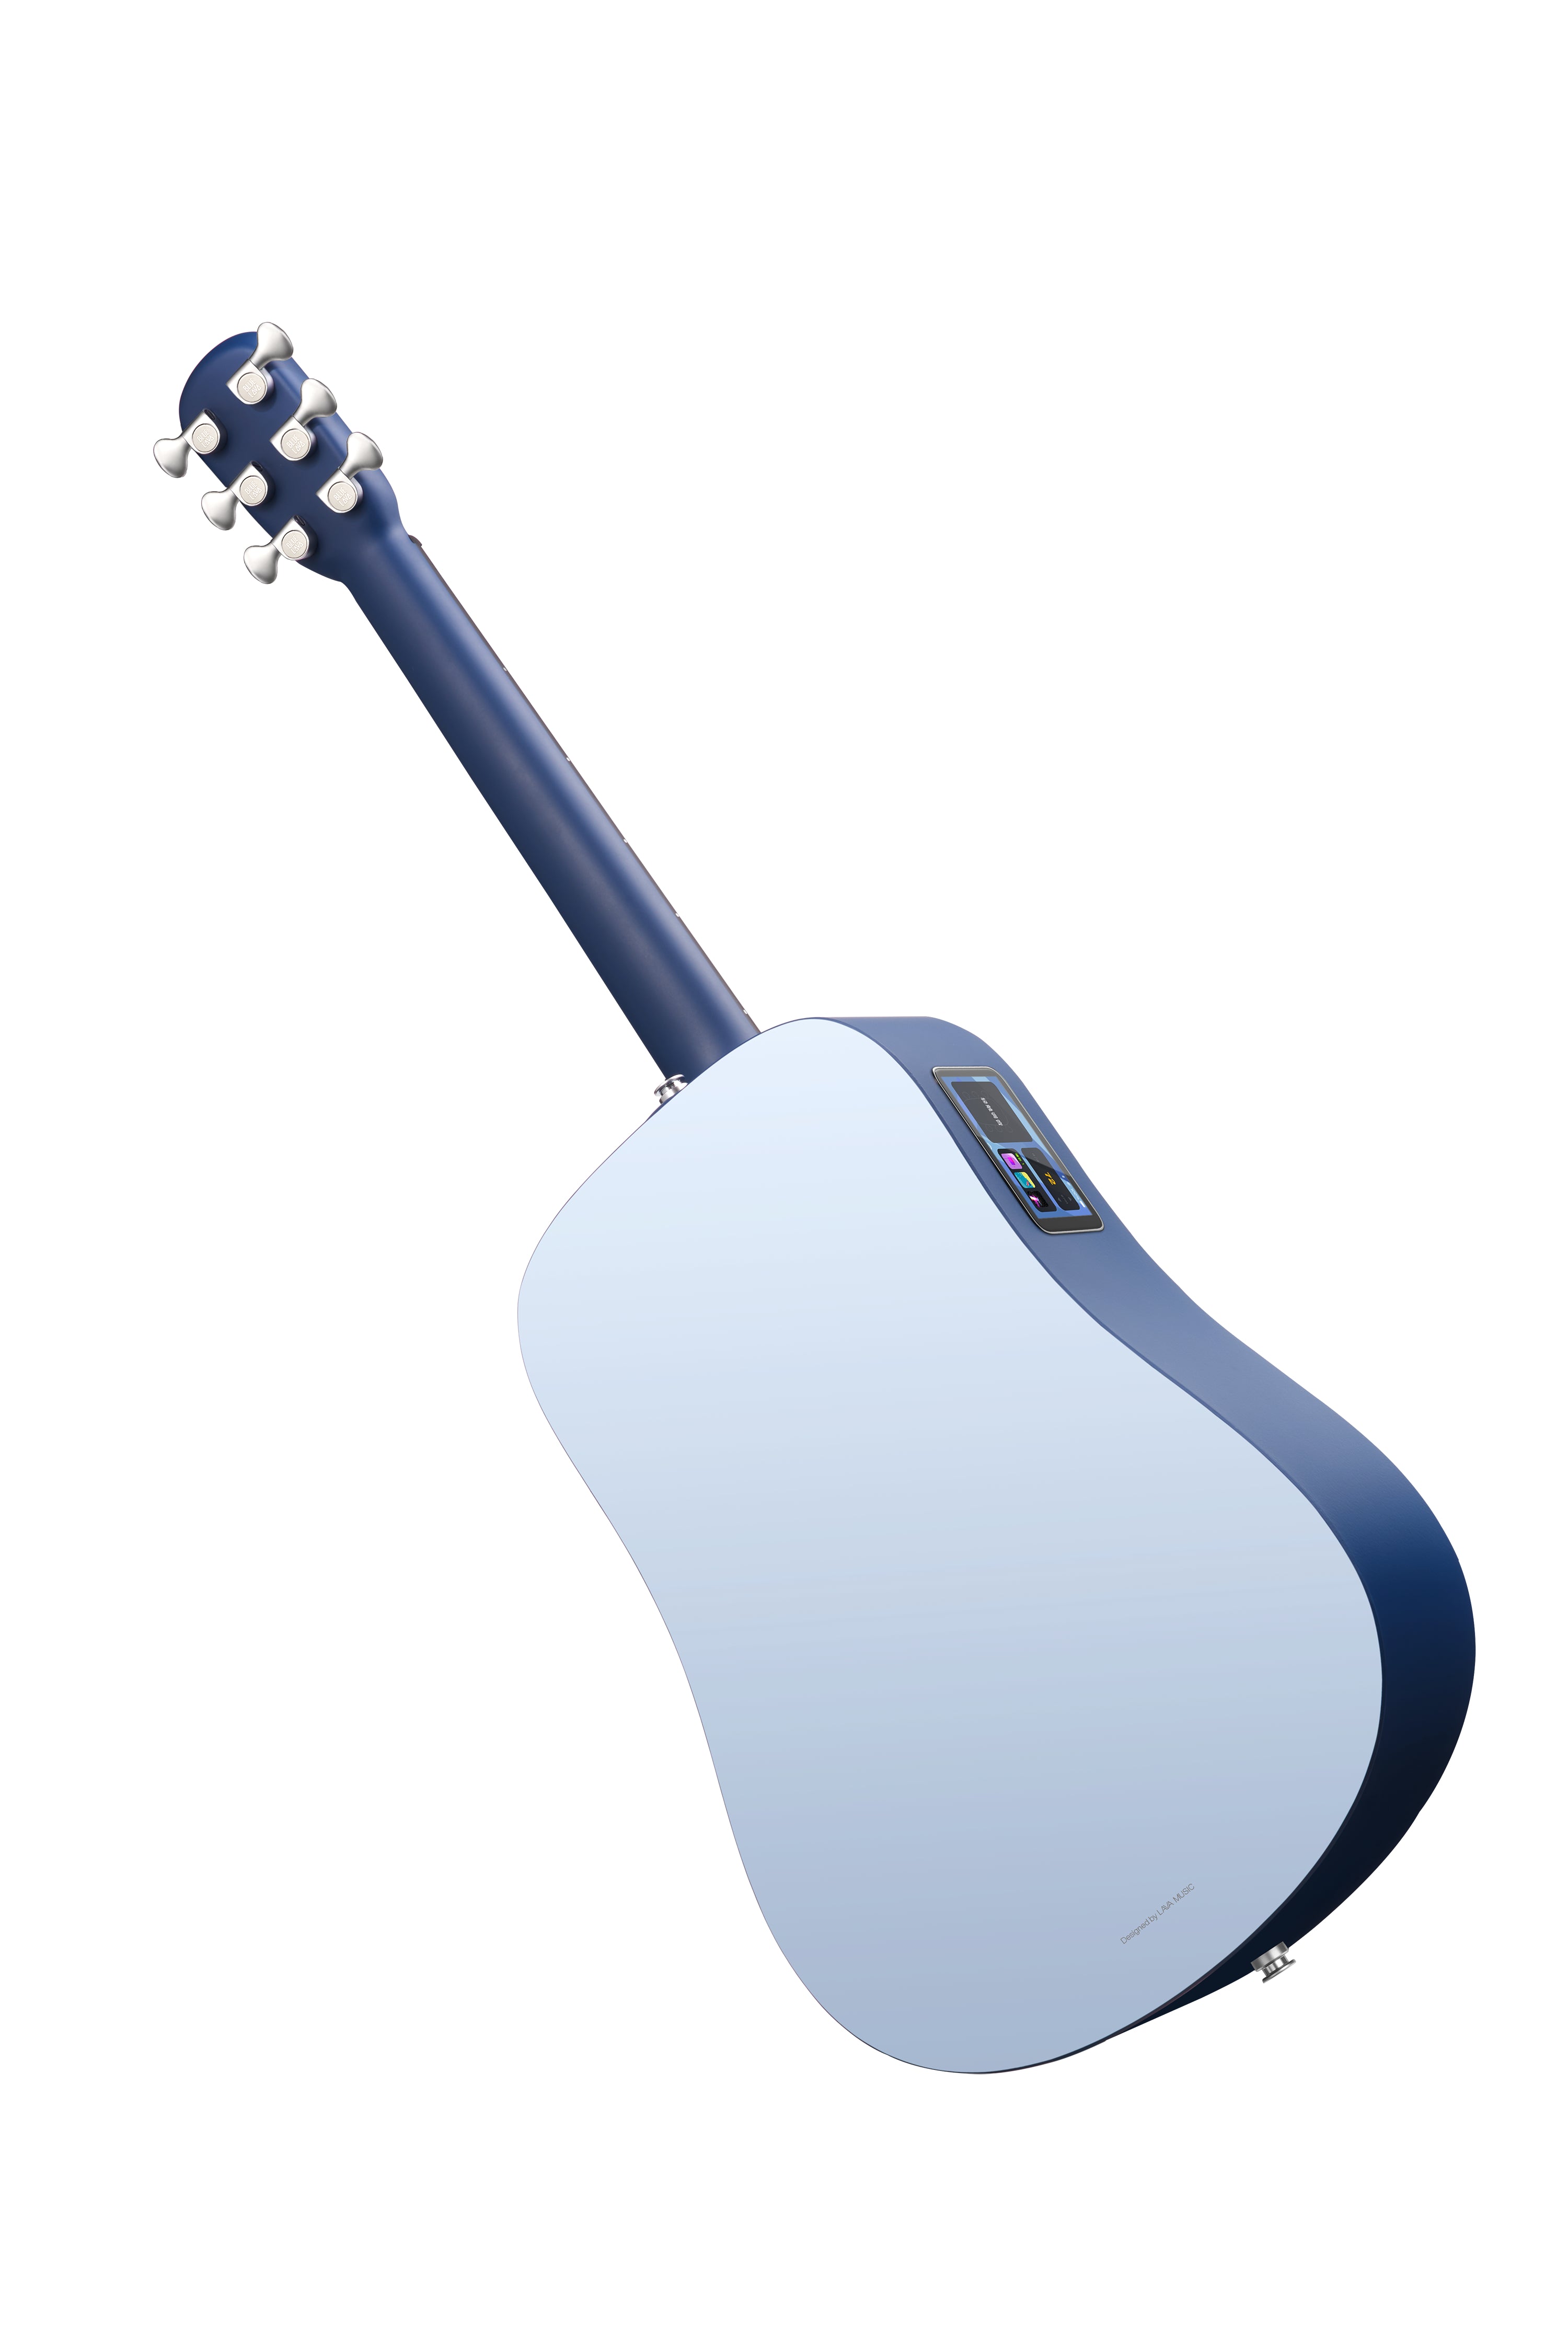 BLUE LAVA TOUCH with Airflow Bag ~ Ice Blue / Ocean Blue, Acoustic Guitar for sale at Richards Guitars.